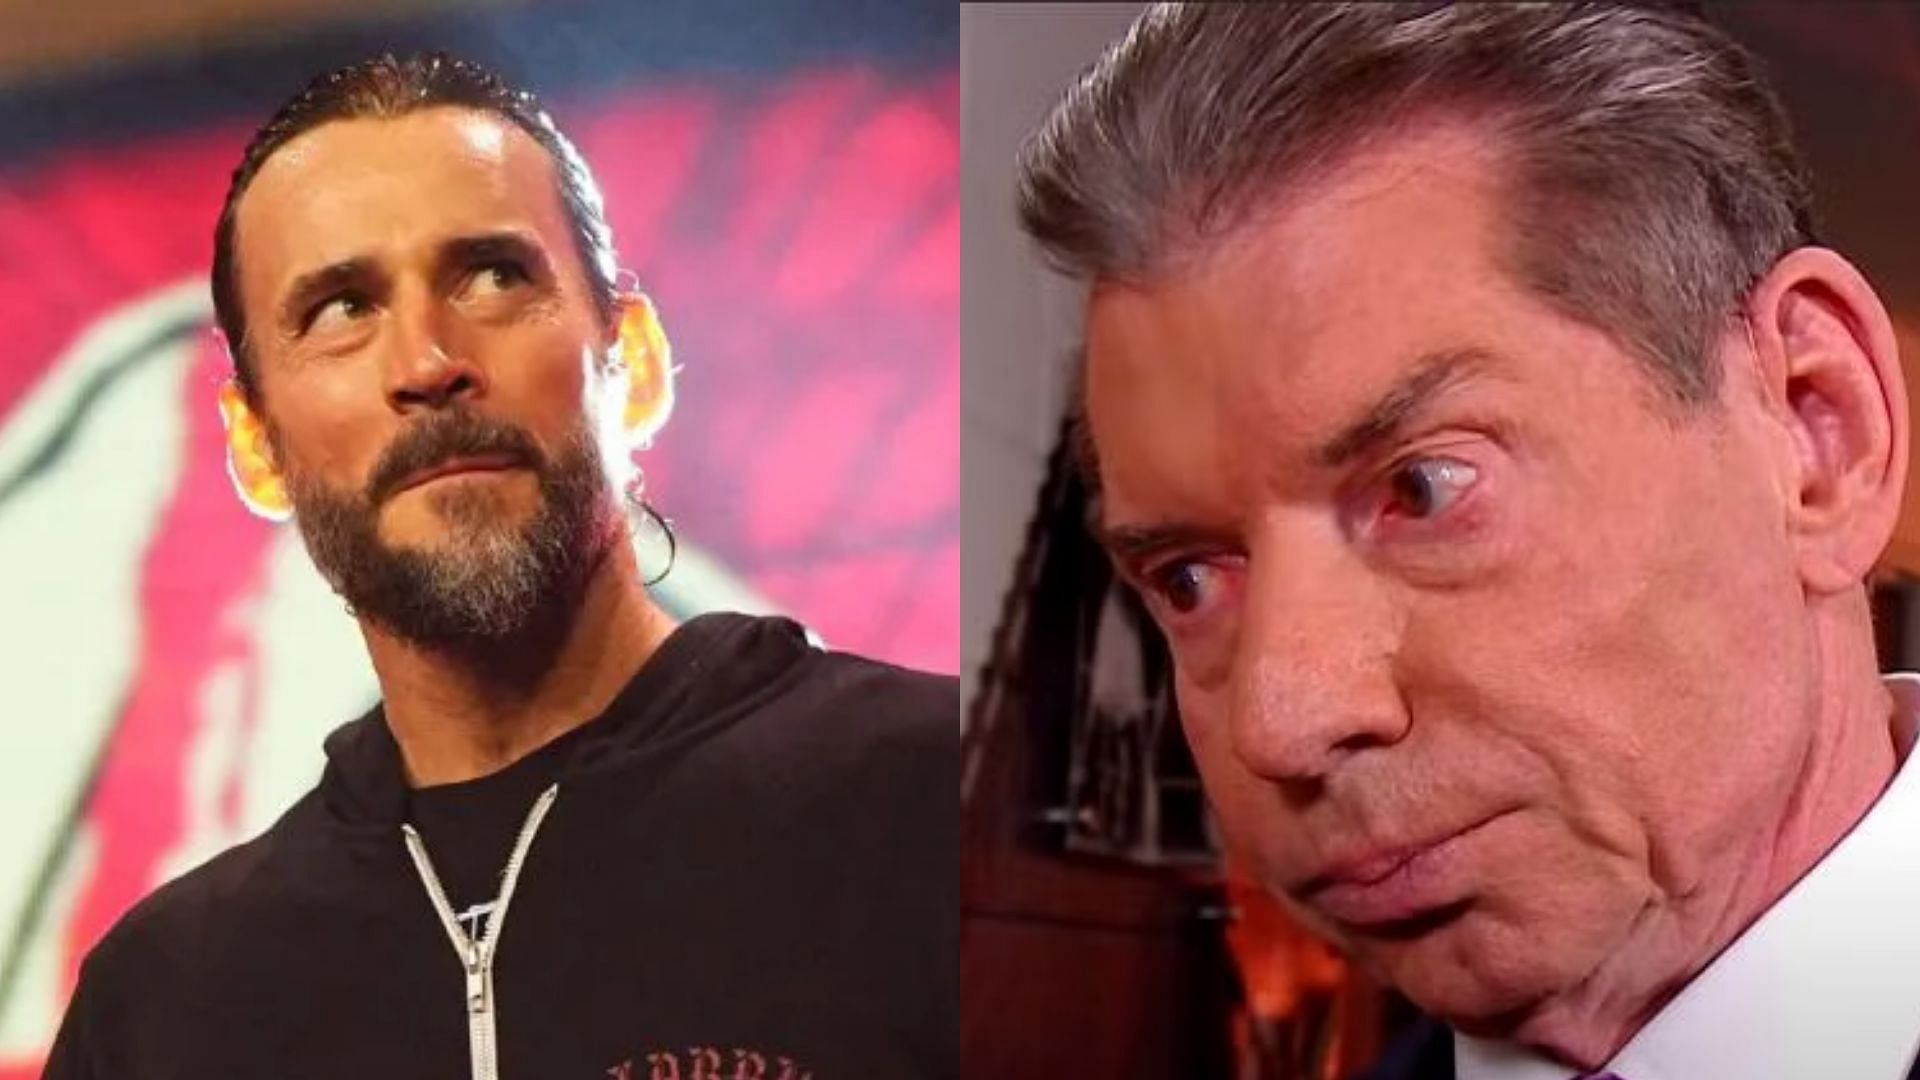 CM Punk and Vince McMahon have not always been fond of one another